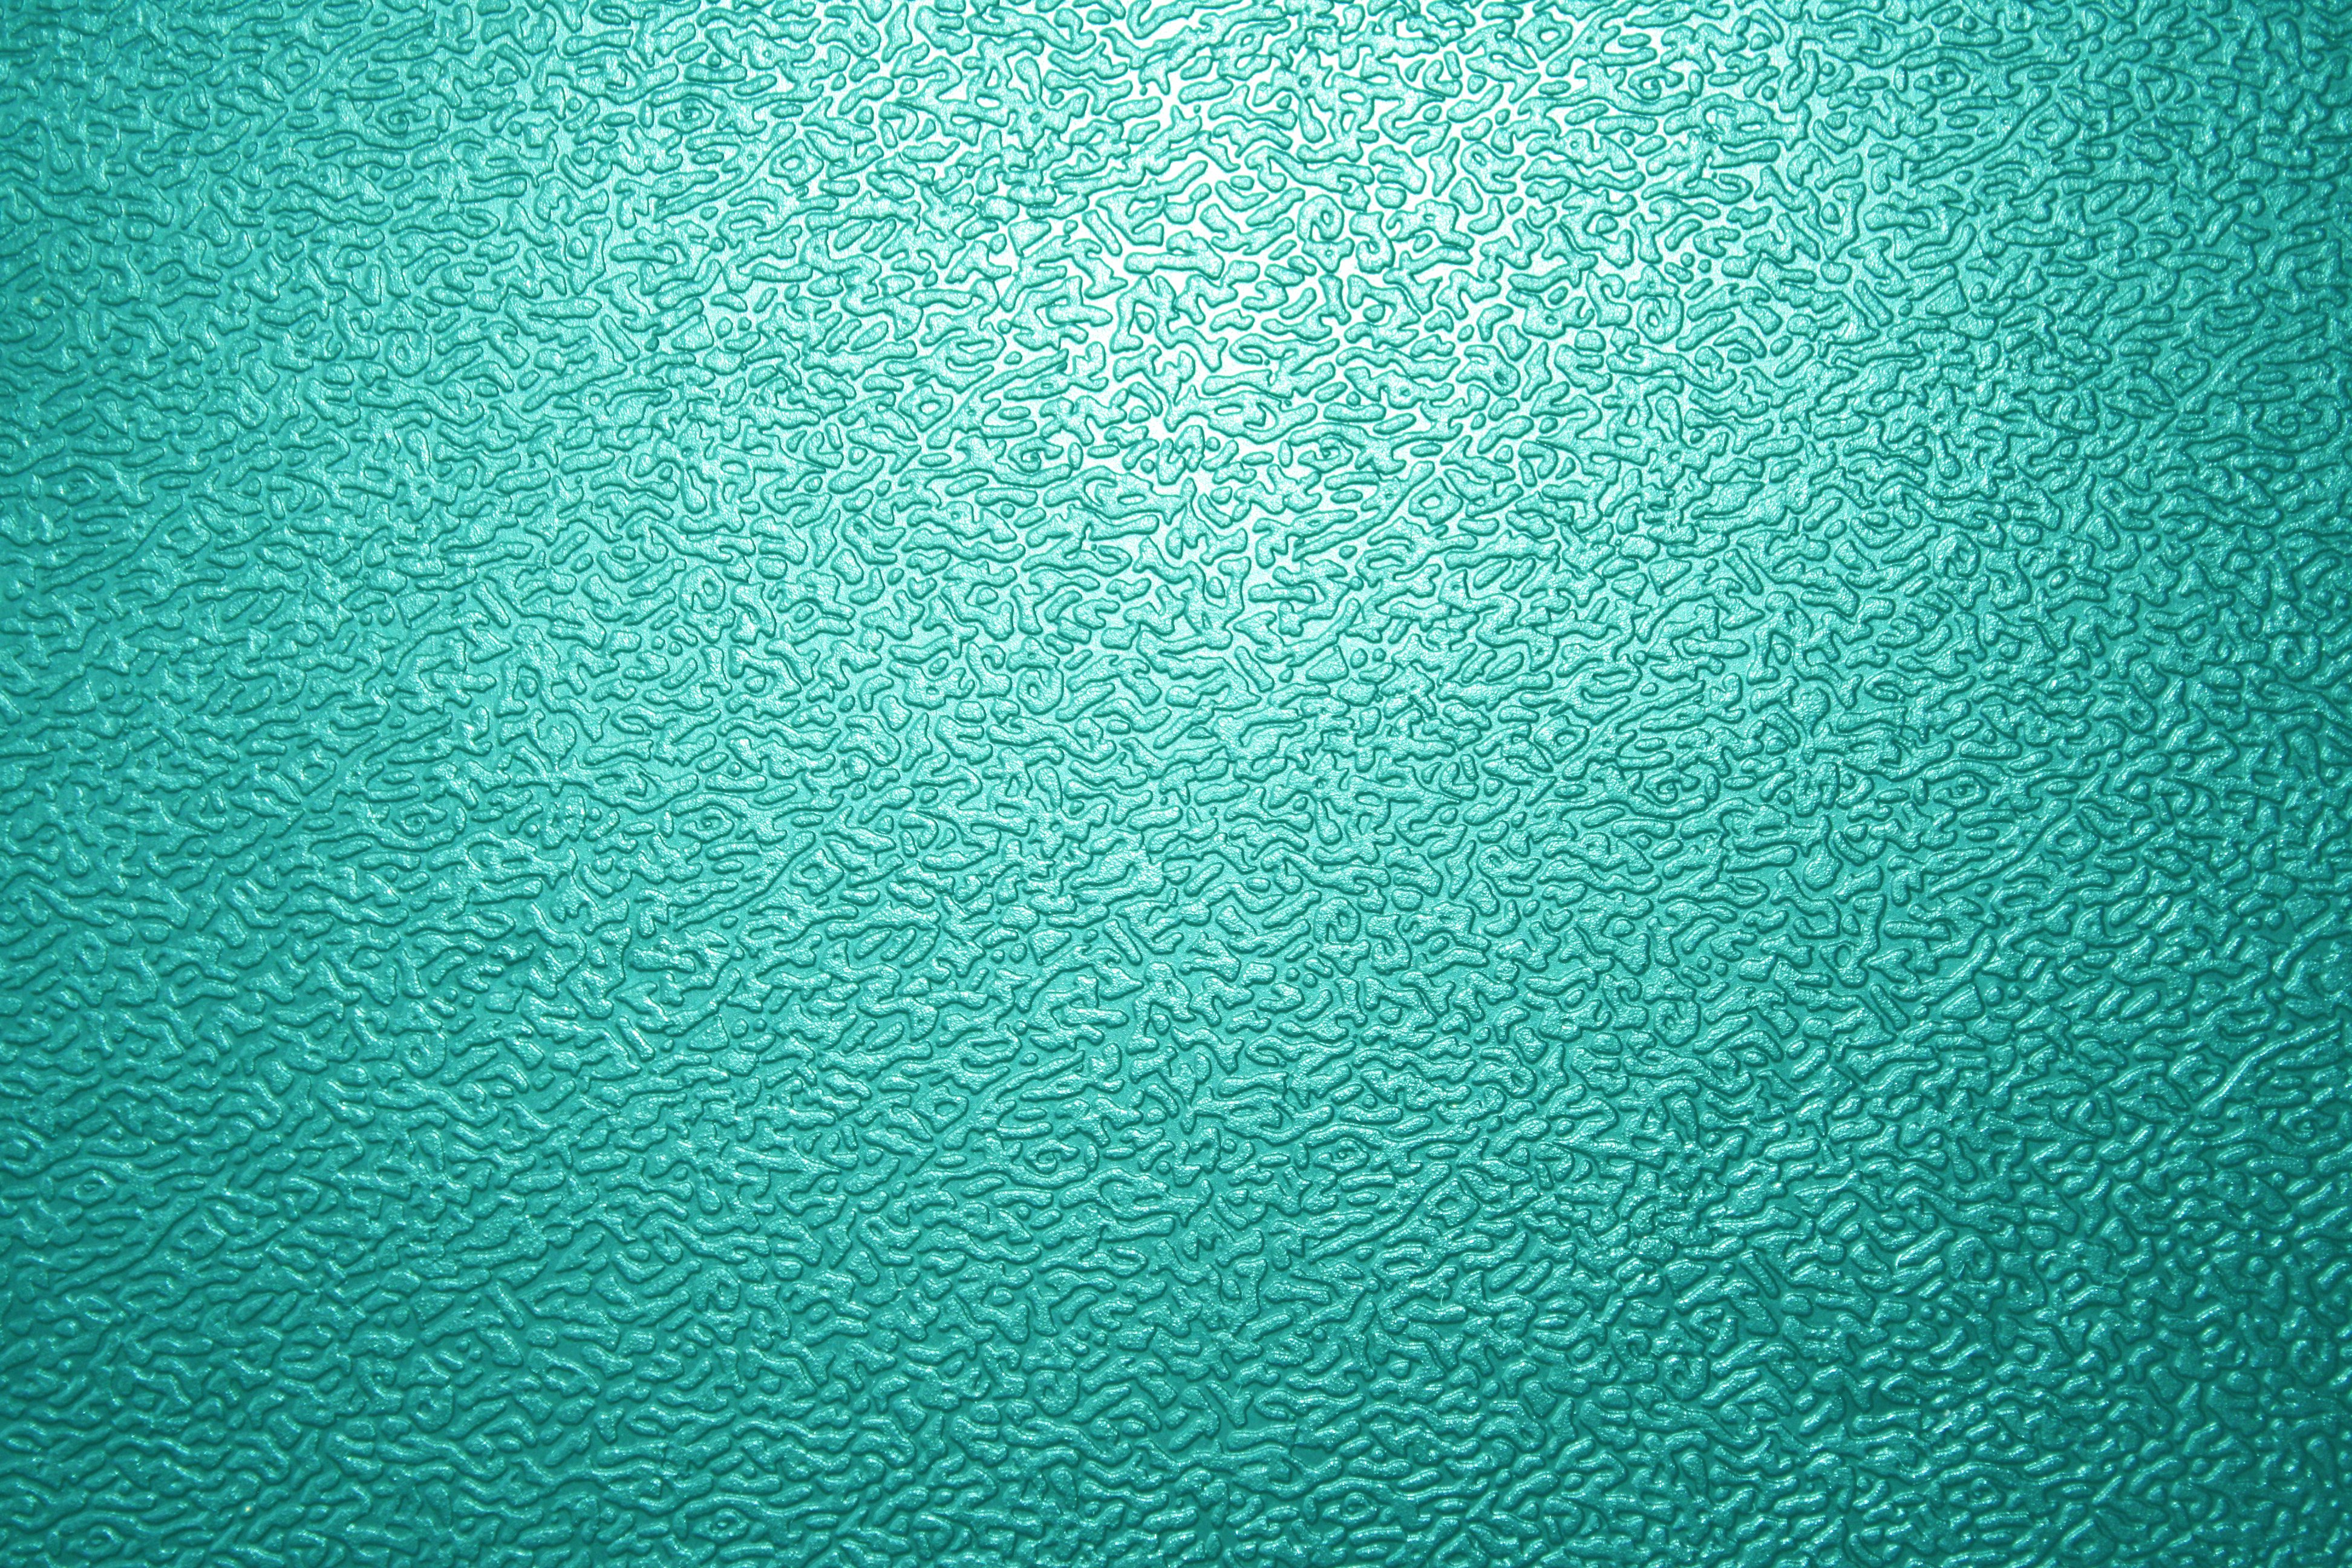 Free Download Teal Wallpaper Hd High Quality [3888x2592] For Your